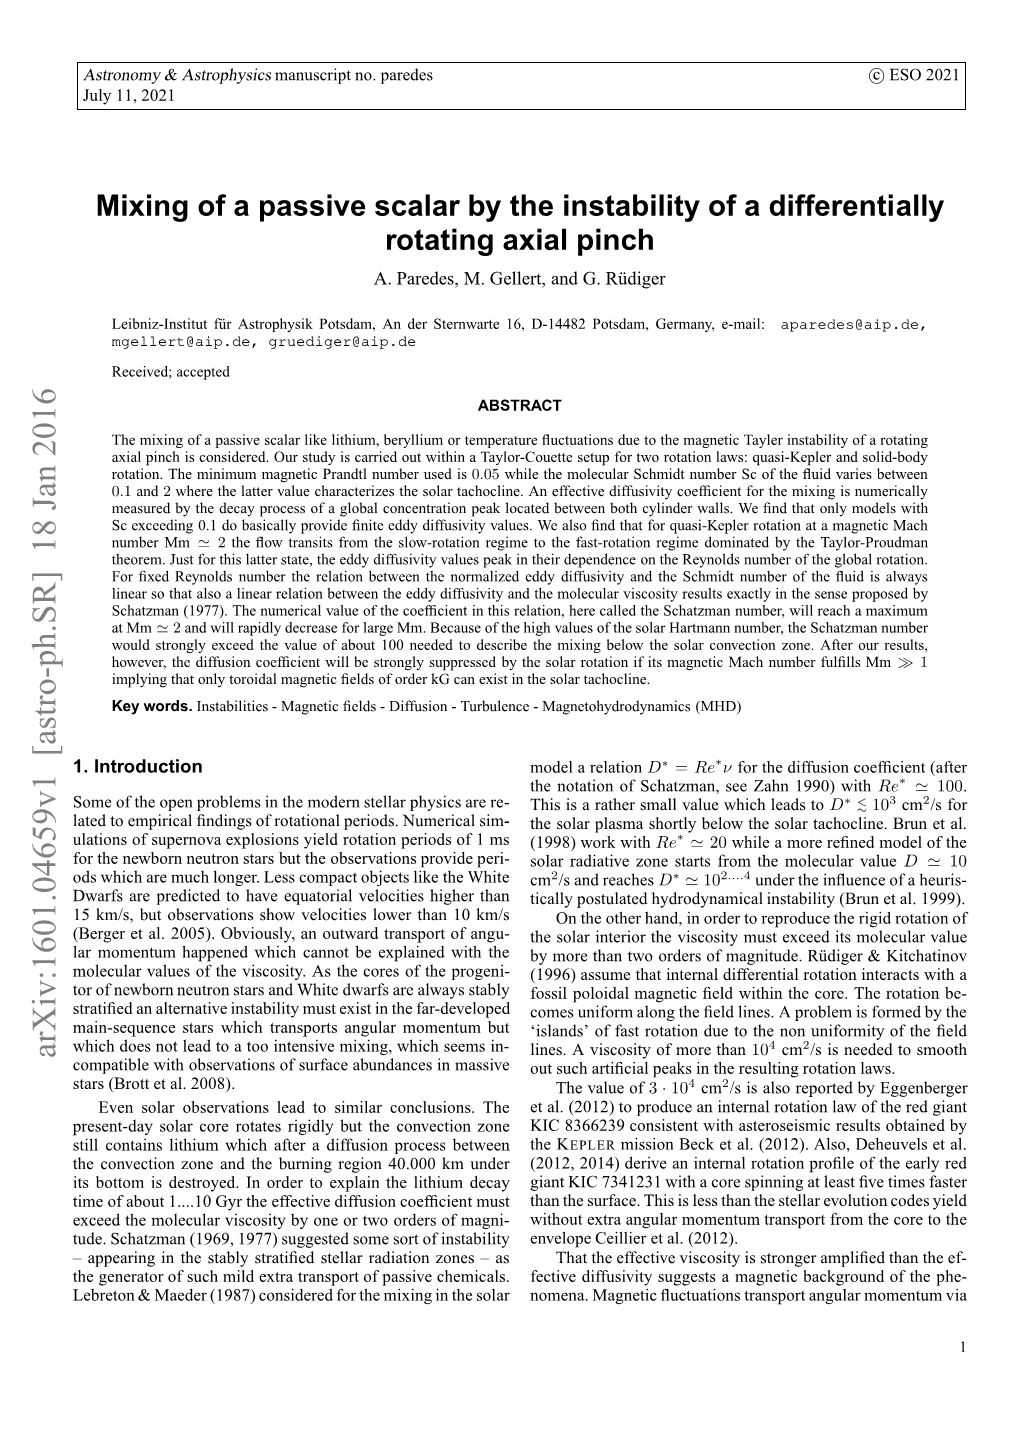 Mixing of a Passive Scalar by the Instability of a Differentially Rotating Axial Pinch